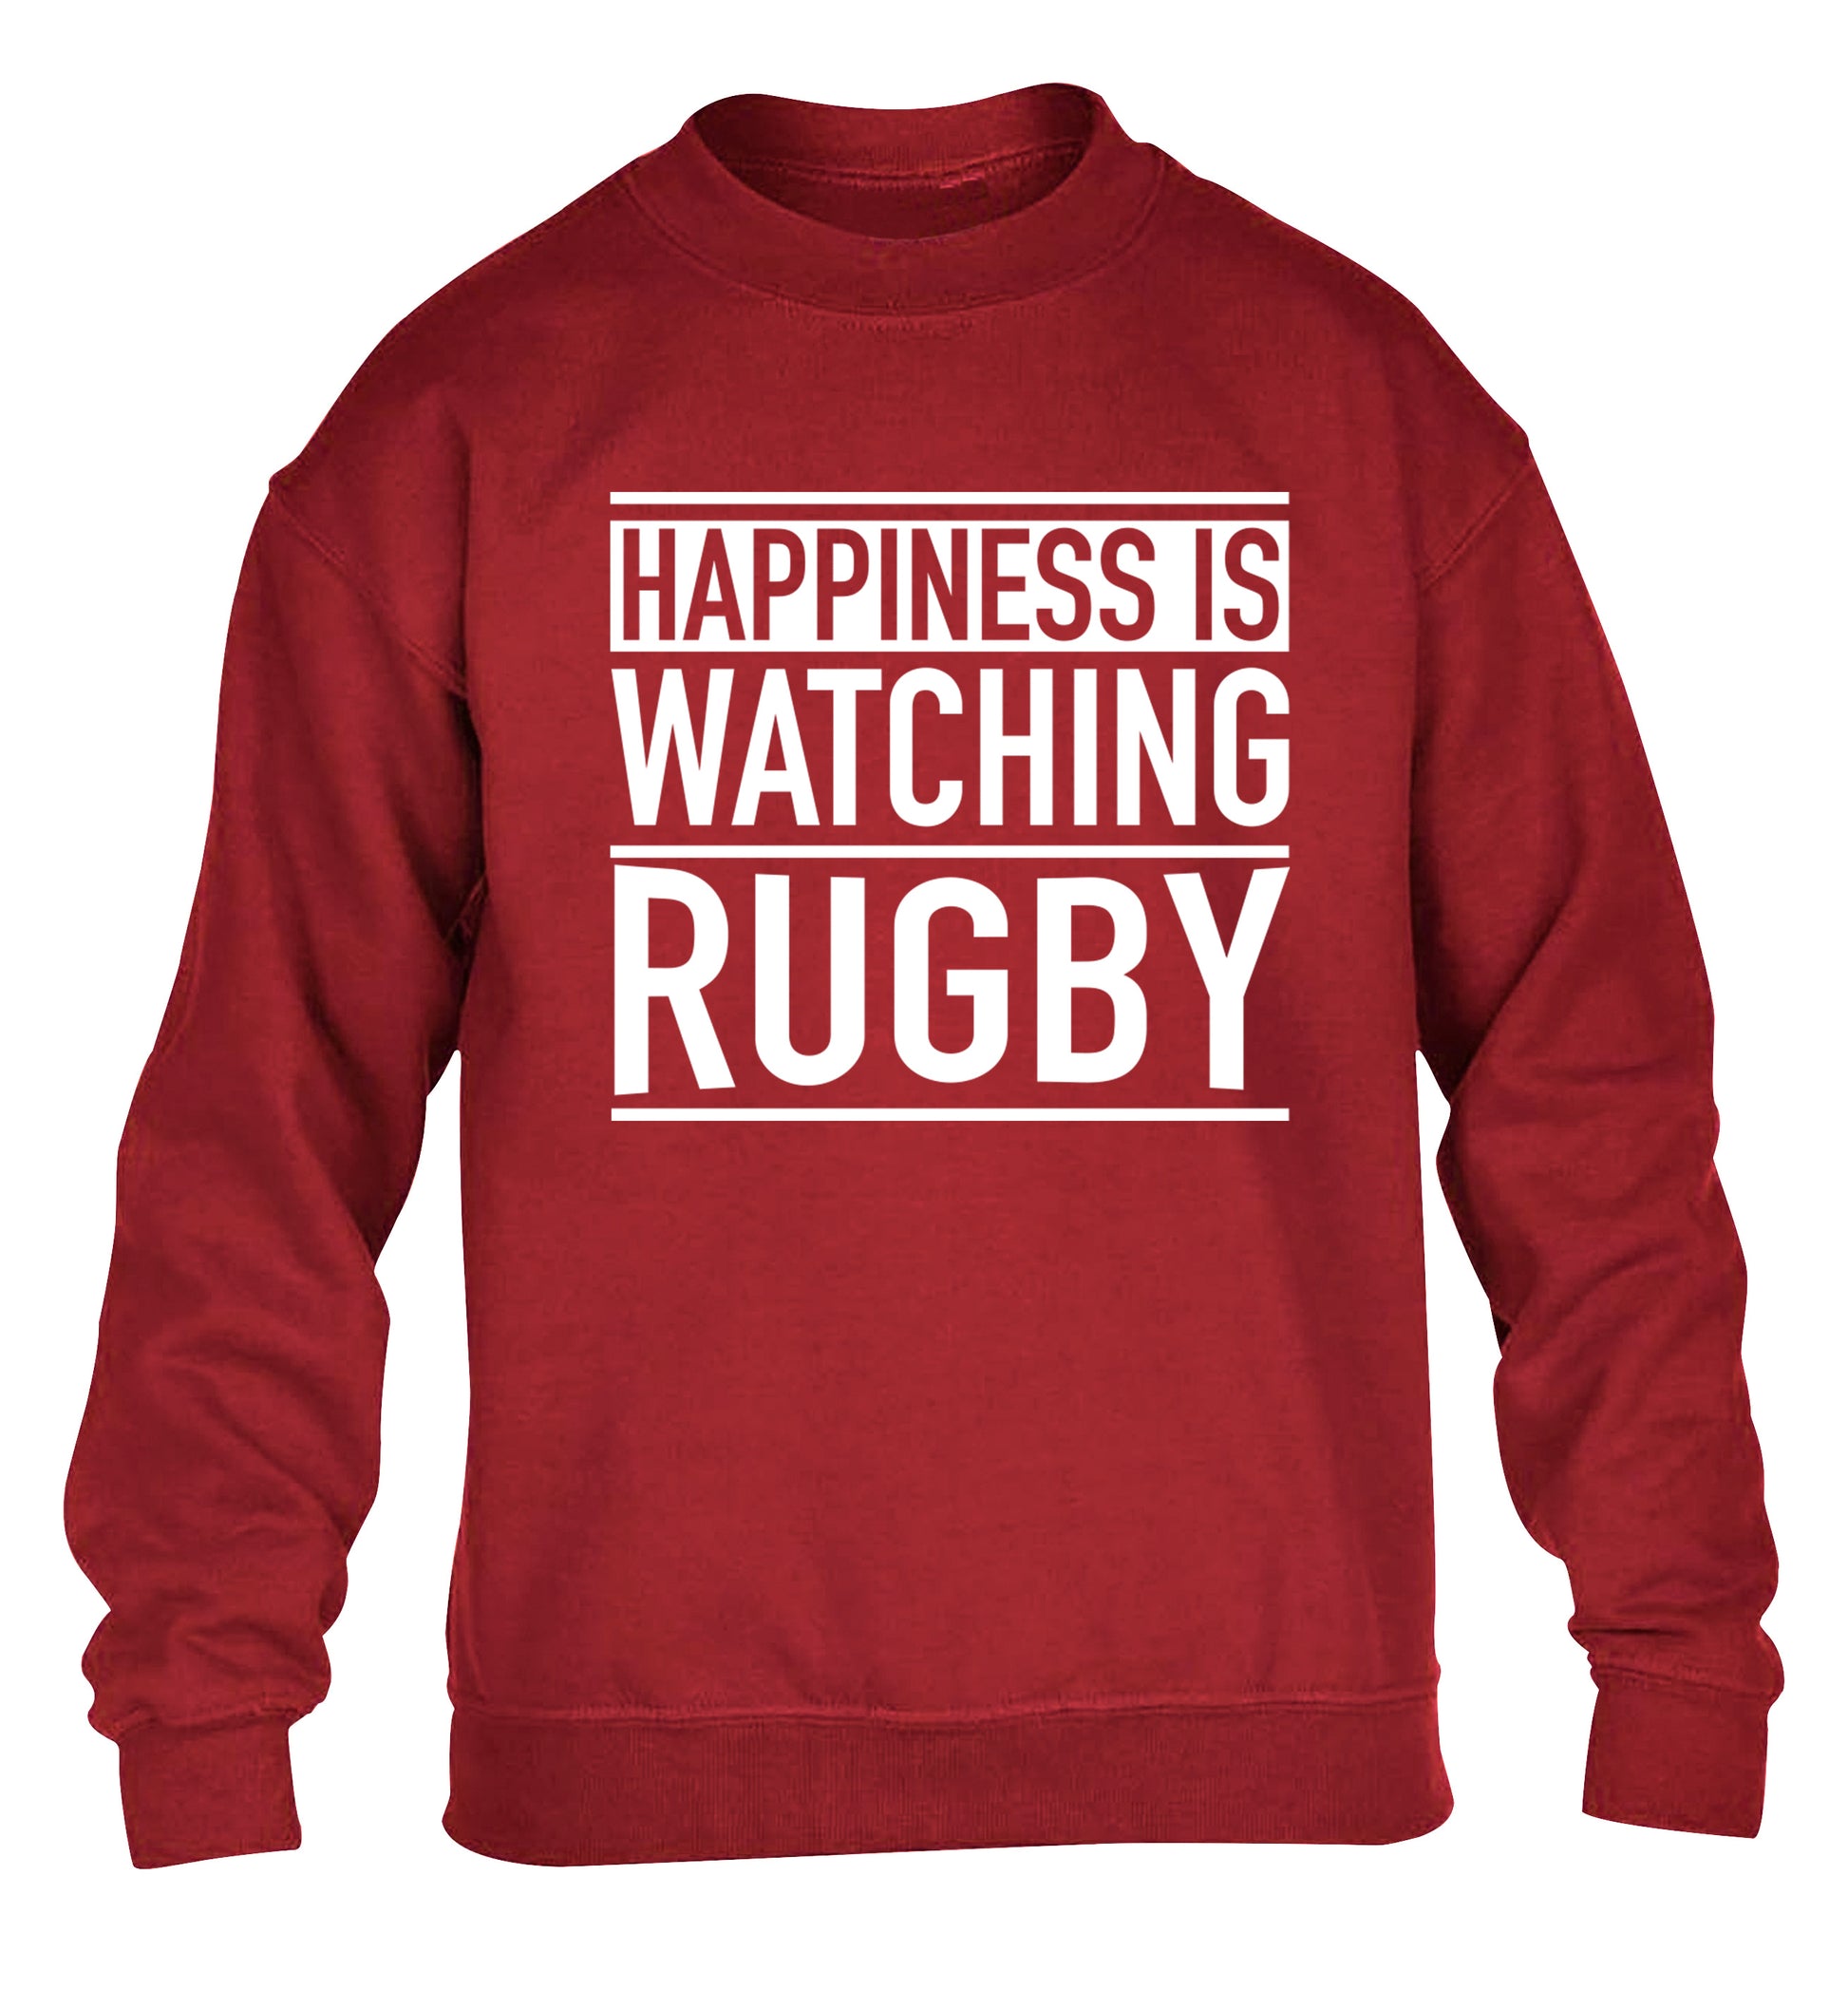 Happiness is watching rugby children's grey sweater 12-13 Years